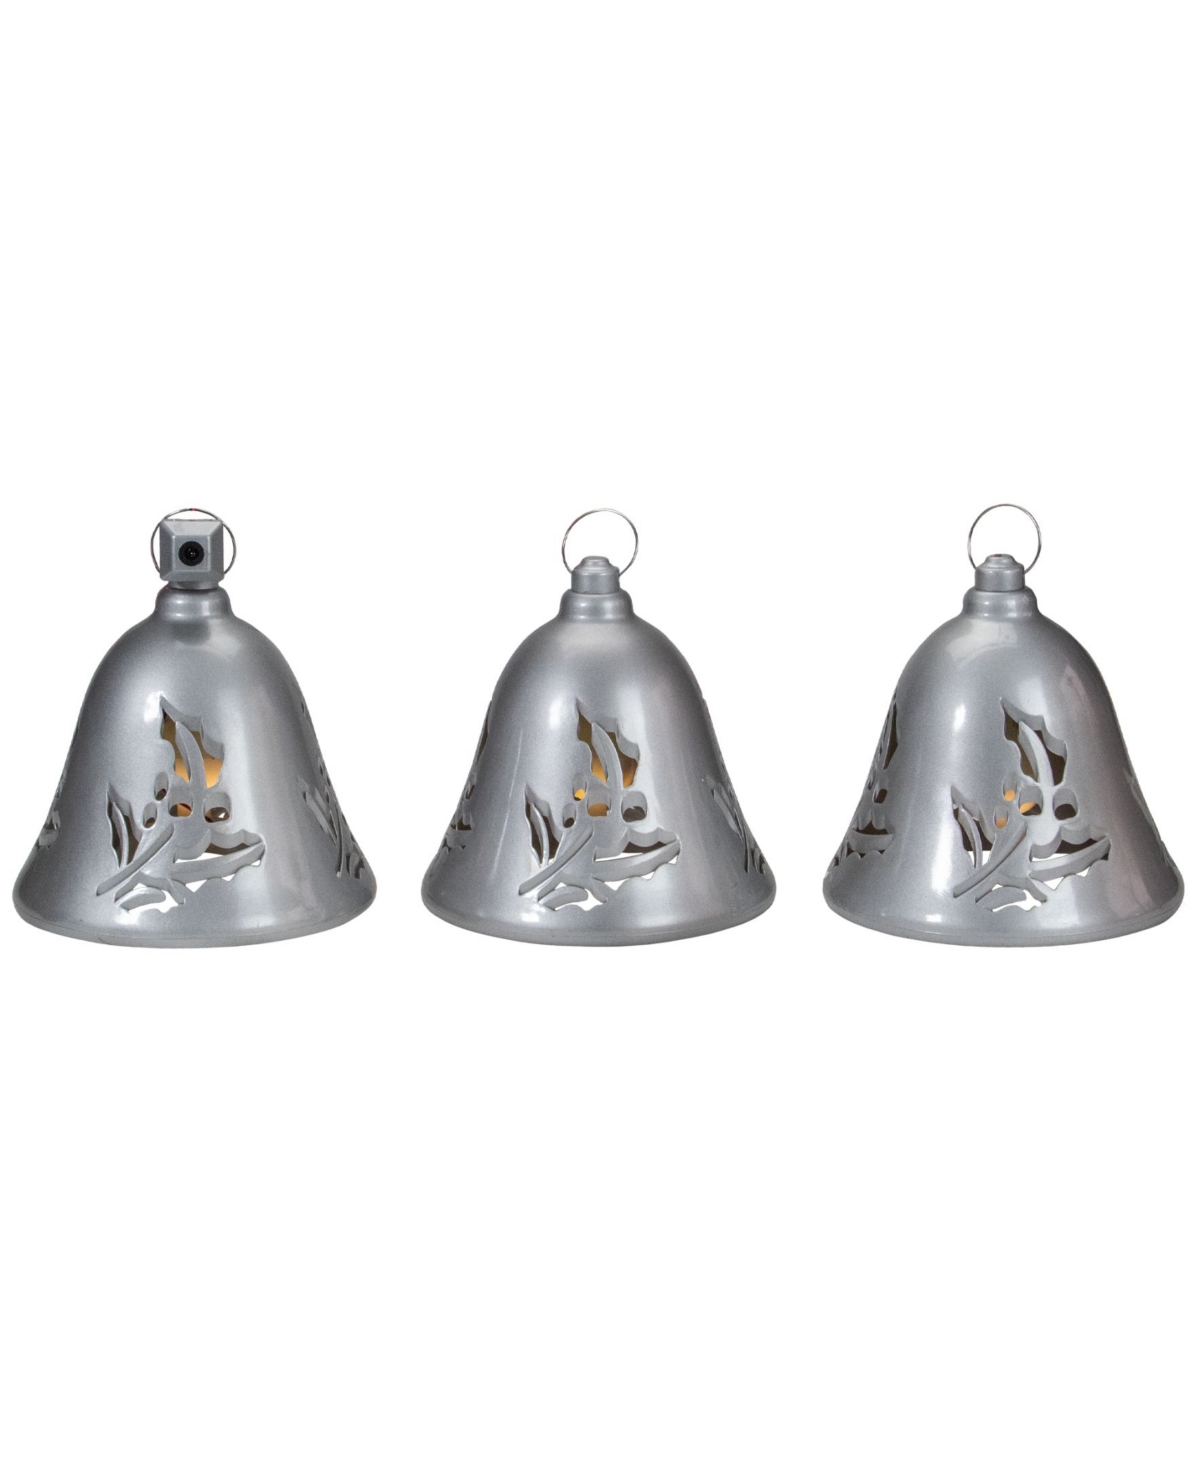 6.5" Musical Lighted Bells Christmas Decorations, Set of 3 - Silver-Tone